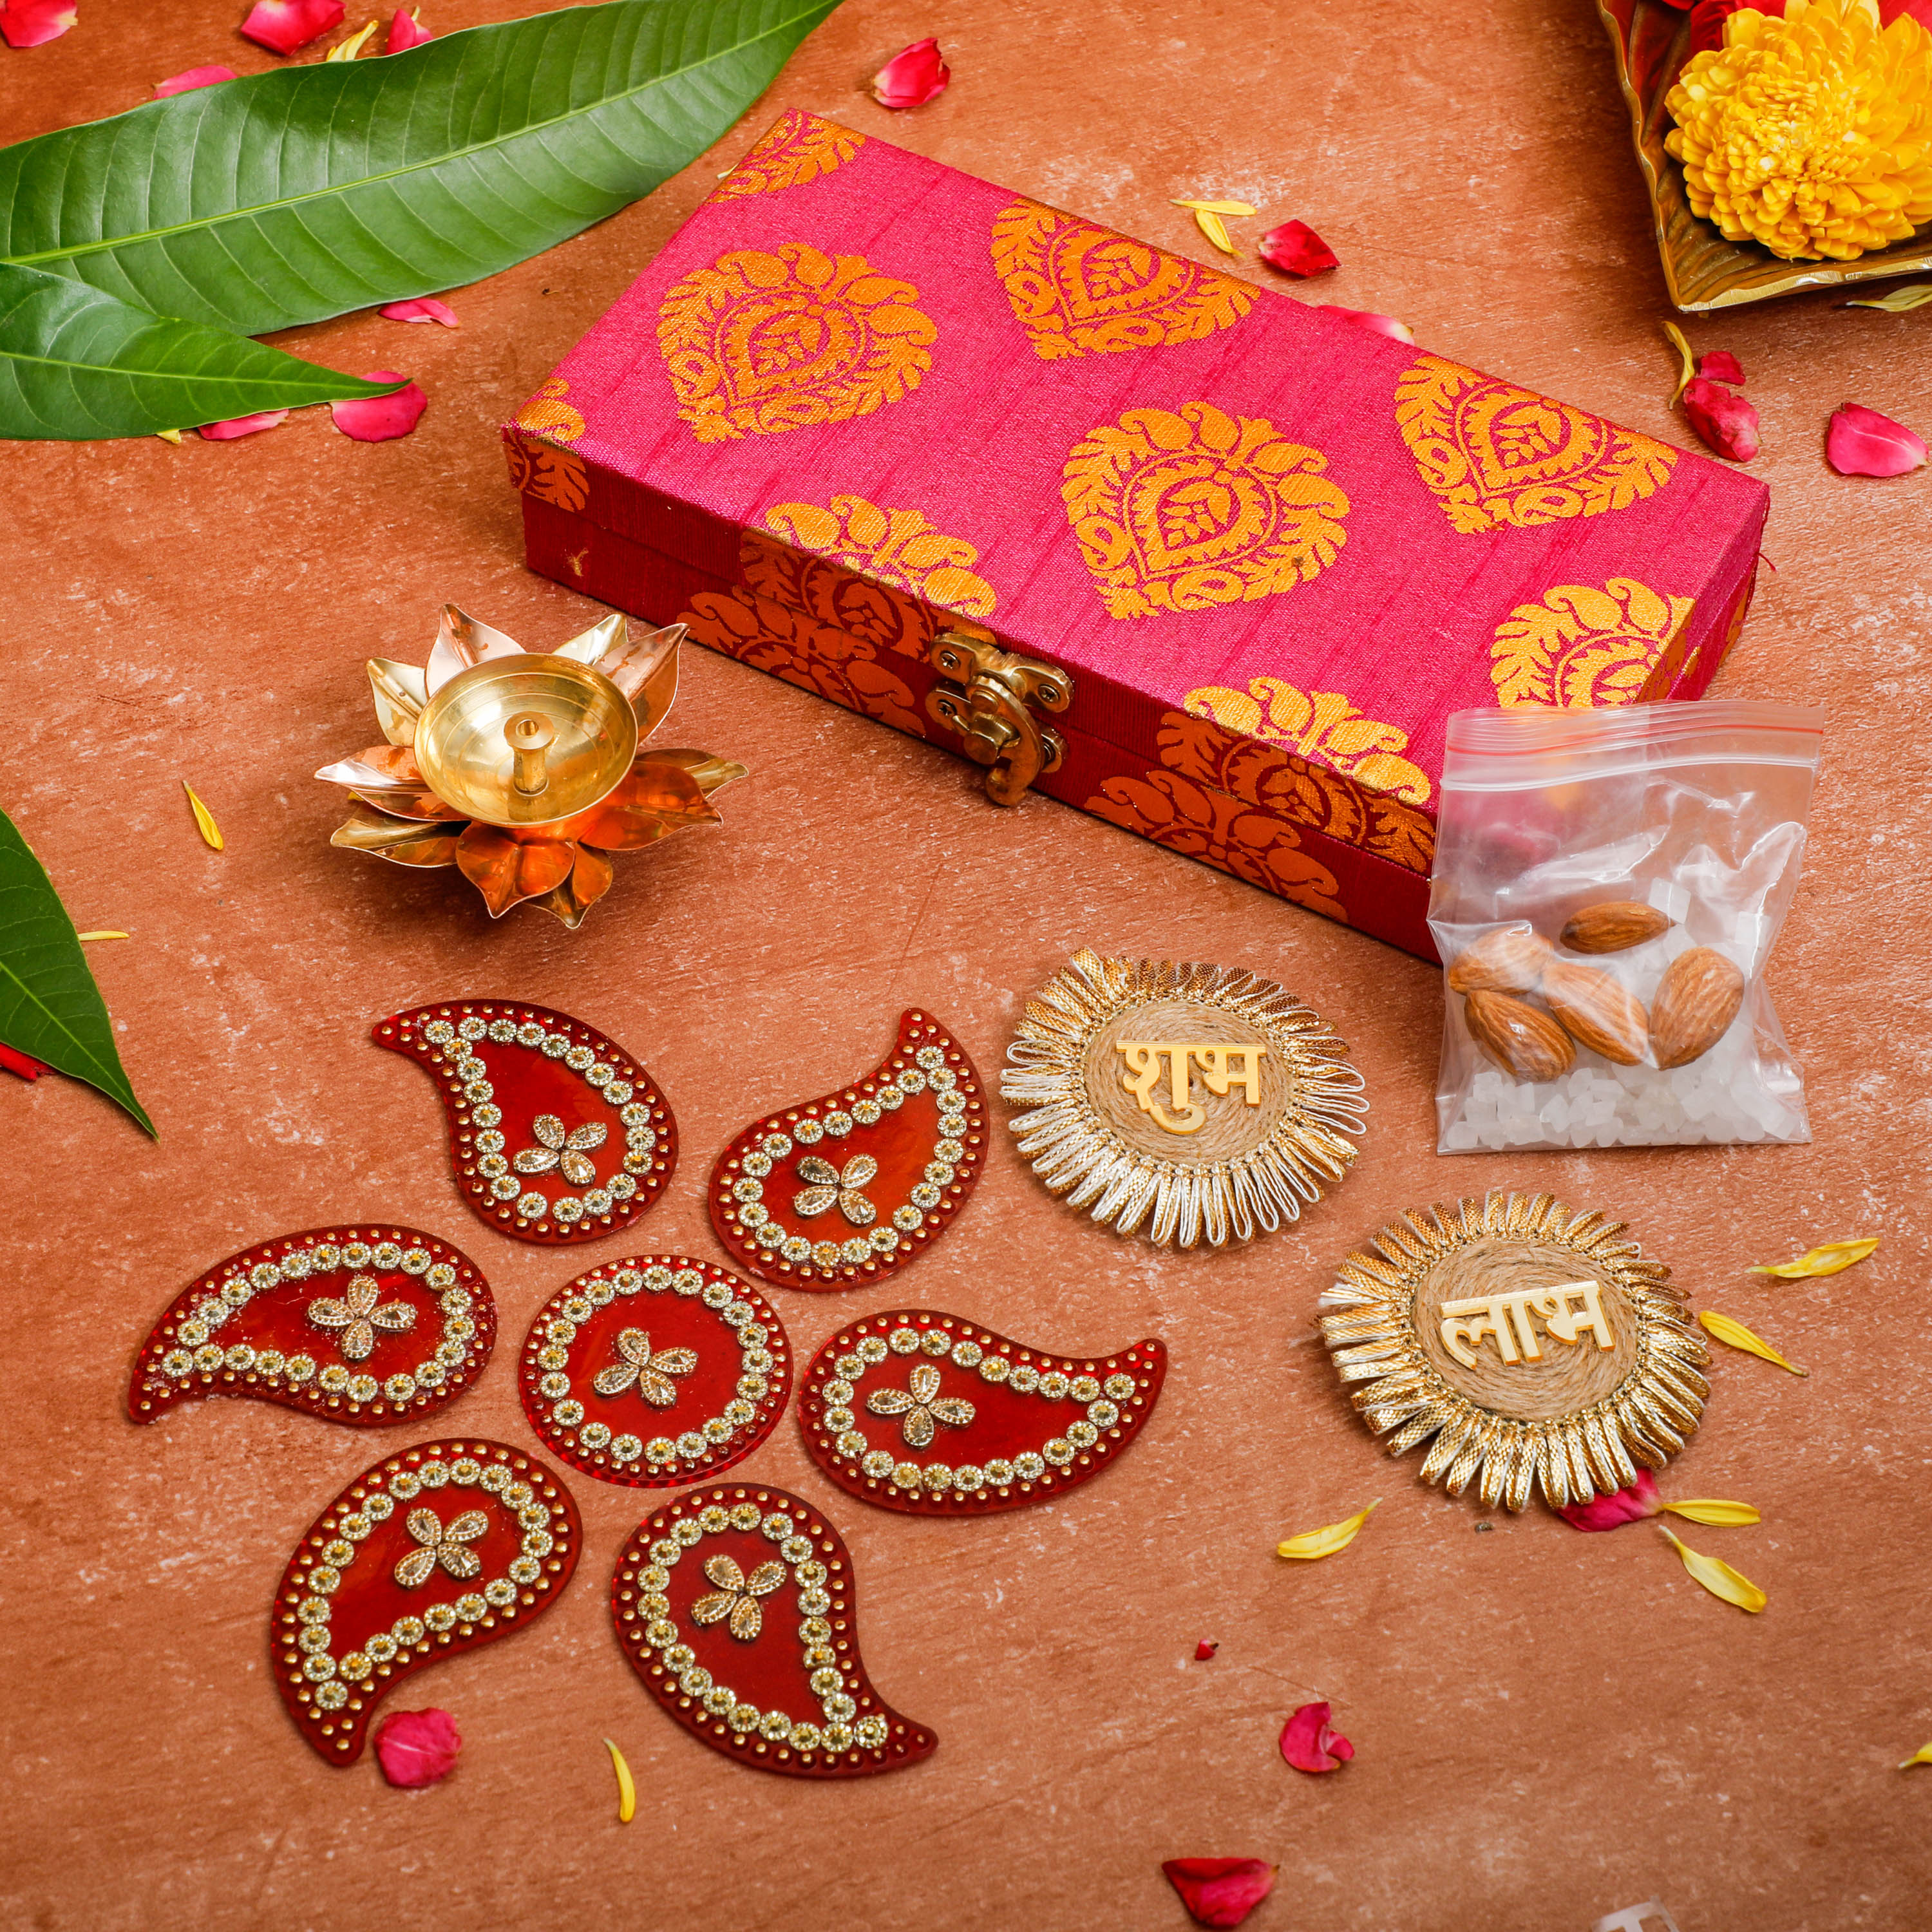 Celebrate Diwali With Interesting Gifts